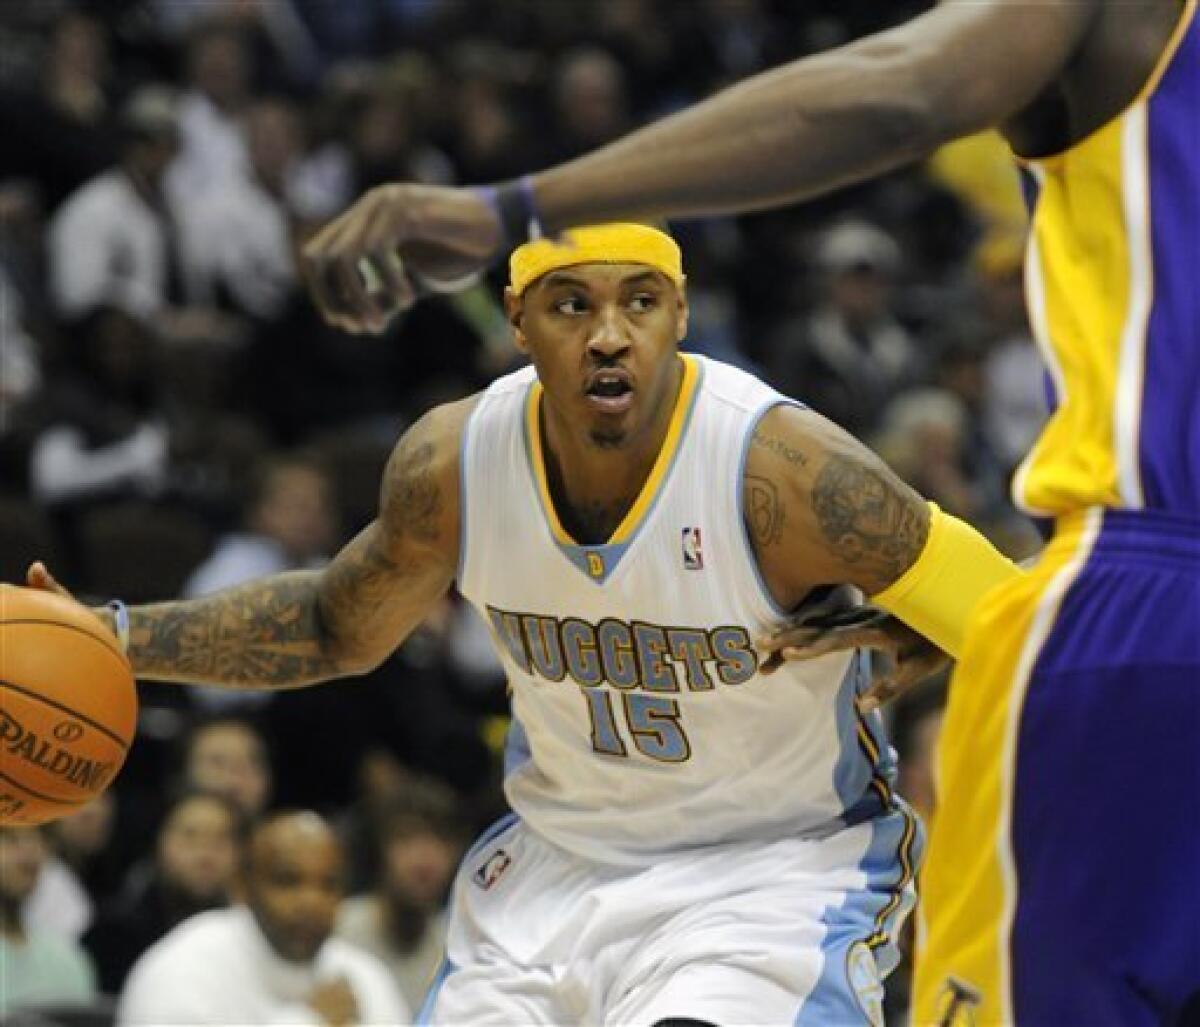 Denver Nuggets' Carmelo Anthony, left, shoots over Los Angeles